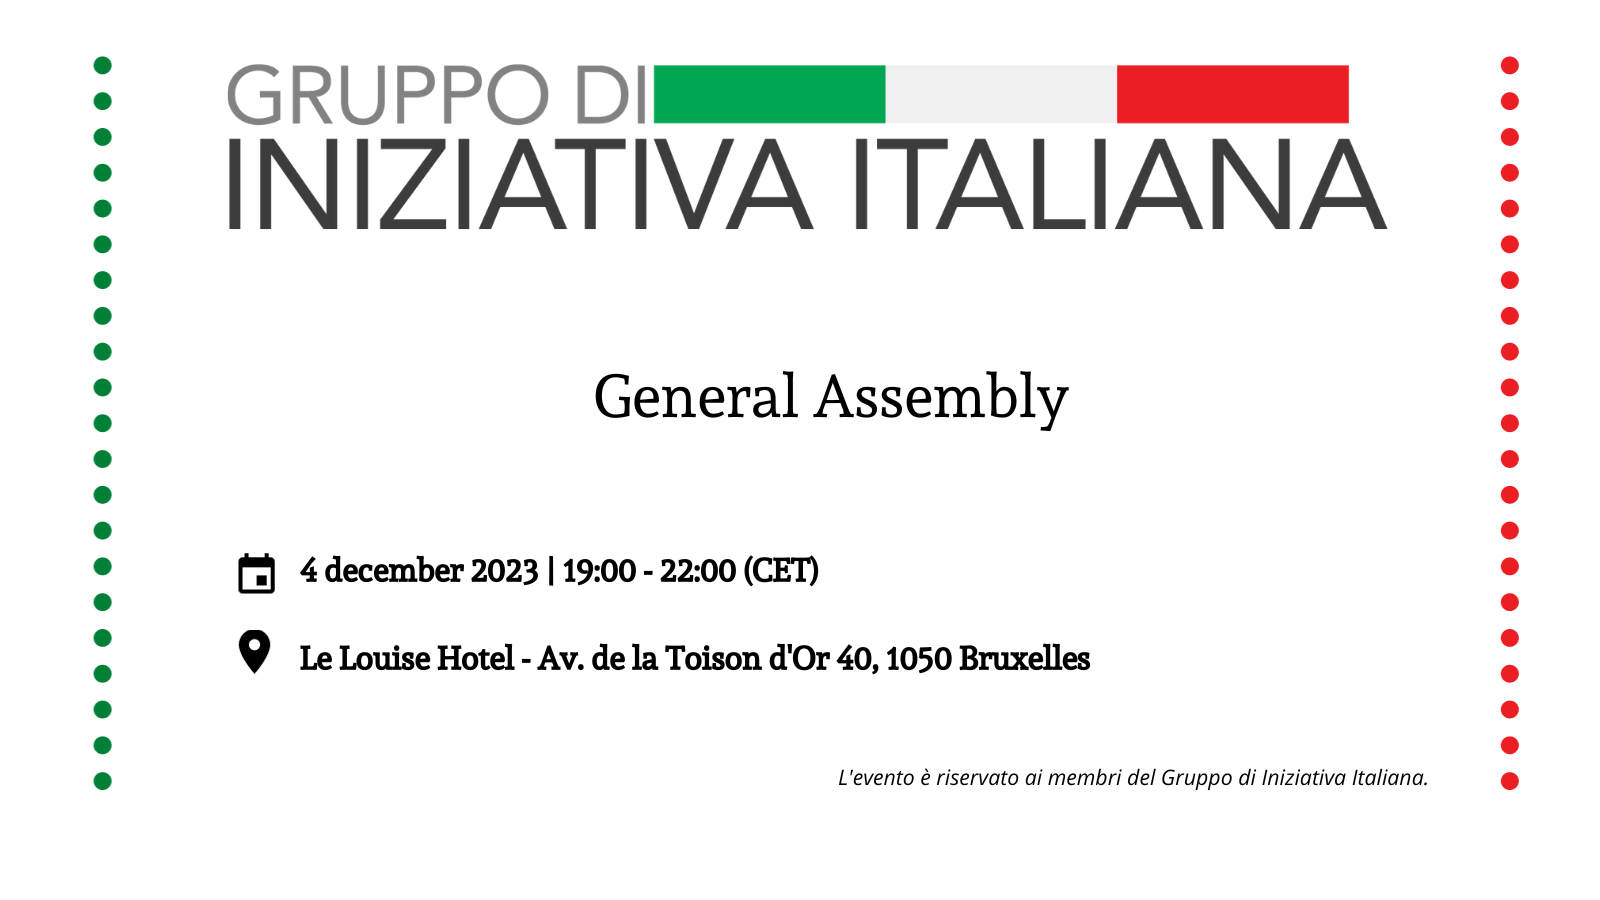 GII | General Assembly of the Italian Initiative Group | 4 December – 19h00, Le Louise Hotel